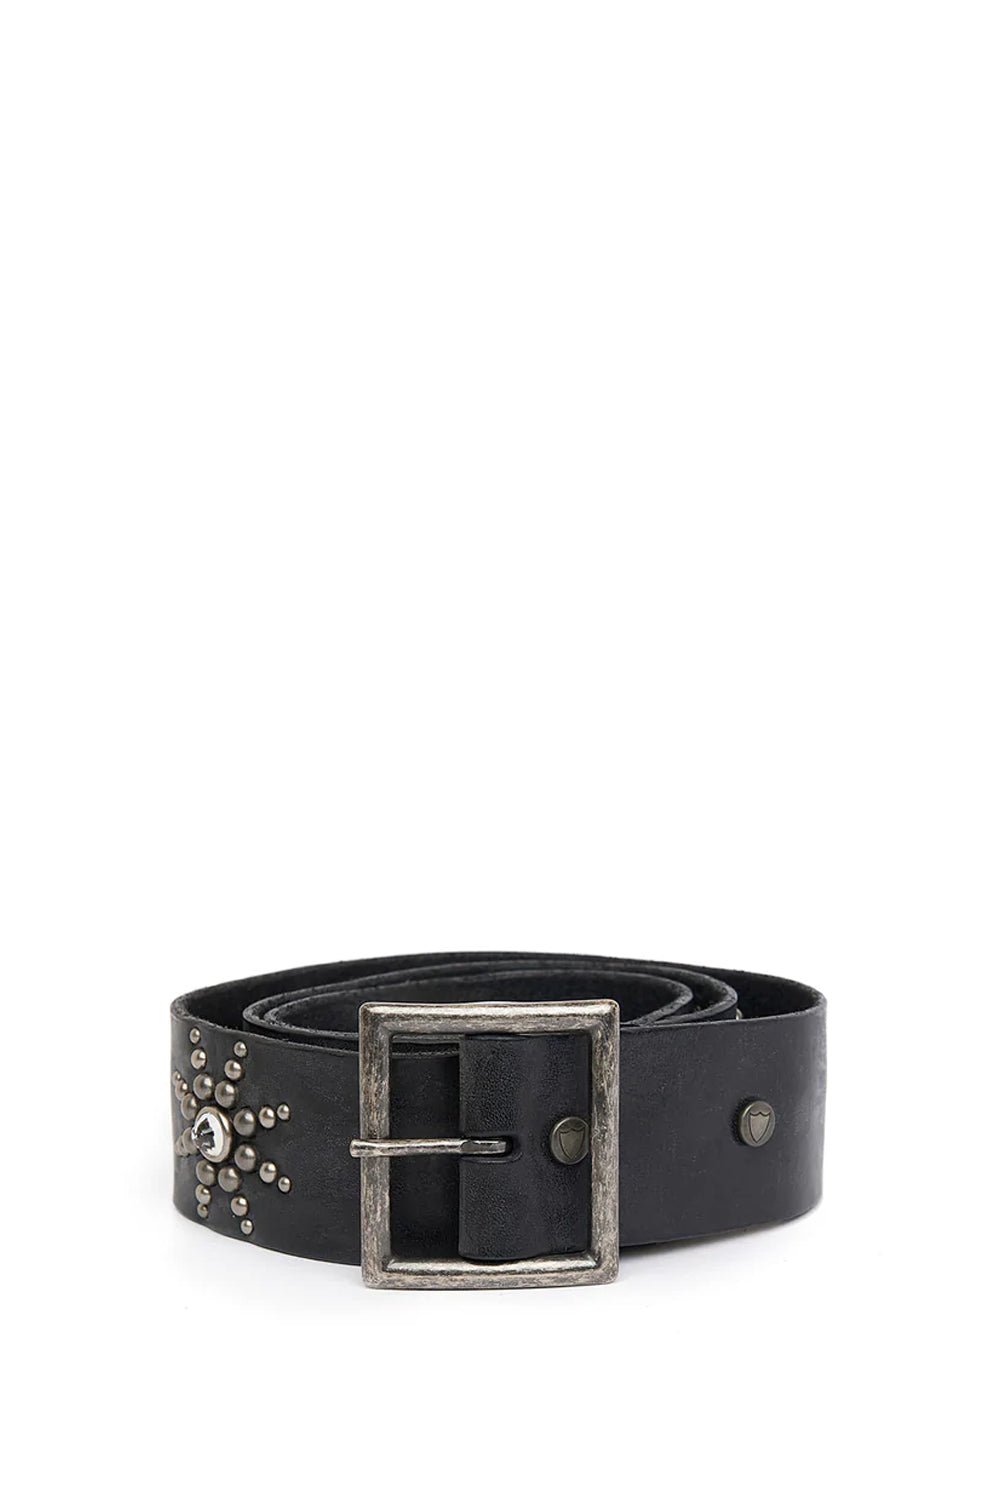 PASADENA BELT Black leather belt with studs and rhinestones. Brass buckle. Height: 4 cm. HTC LOS ANGELES